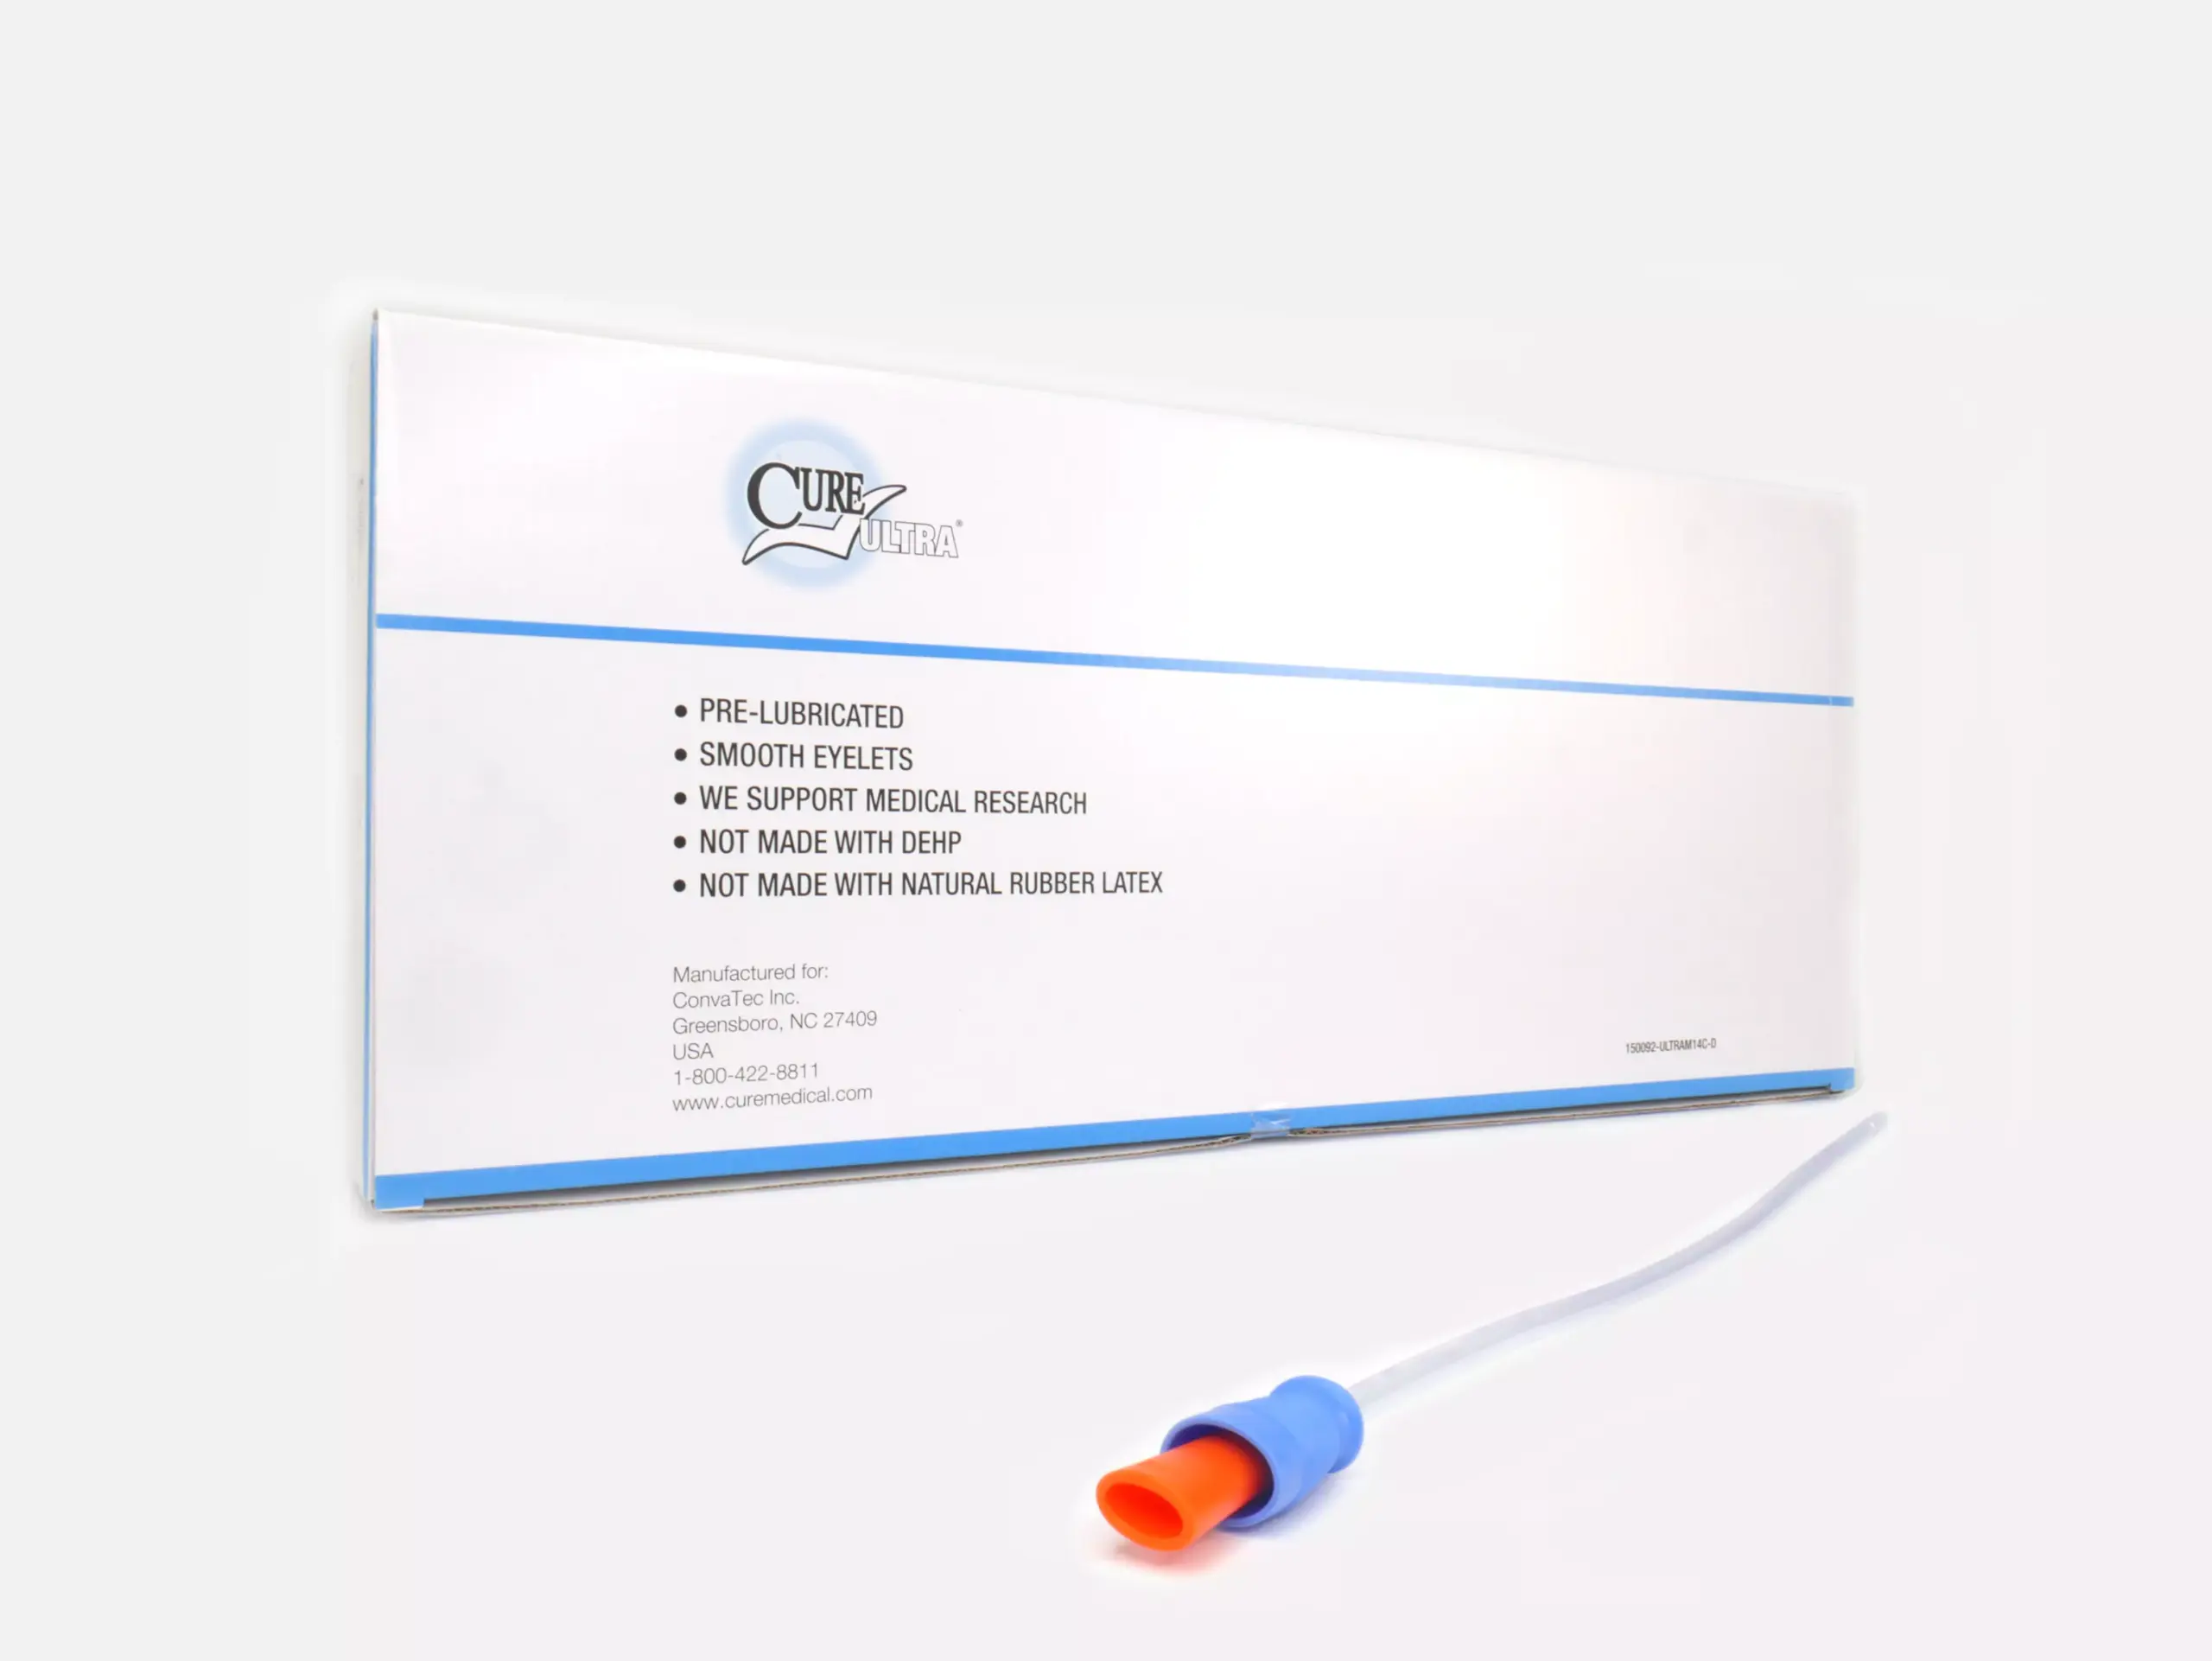 Photograph of a RA Fischer Co. Cure brand catheter box against a white background. Catheter with blue and orange grip is in front of the box. Box reads 'Cure Ultra,' 'Pre-lubricated,' 'Smooth Eyelets,' 'We support medical research,' 'Not made with DEHP,' 'Not made with natural rubber latex.' [ Personalized urology care ]